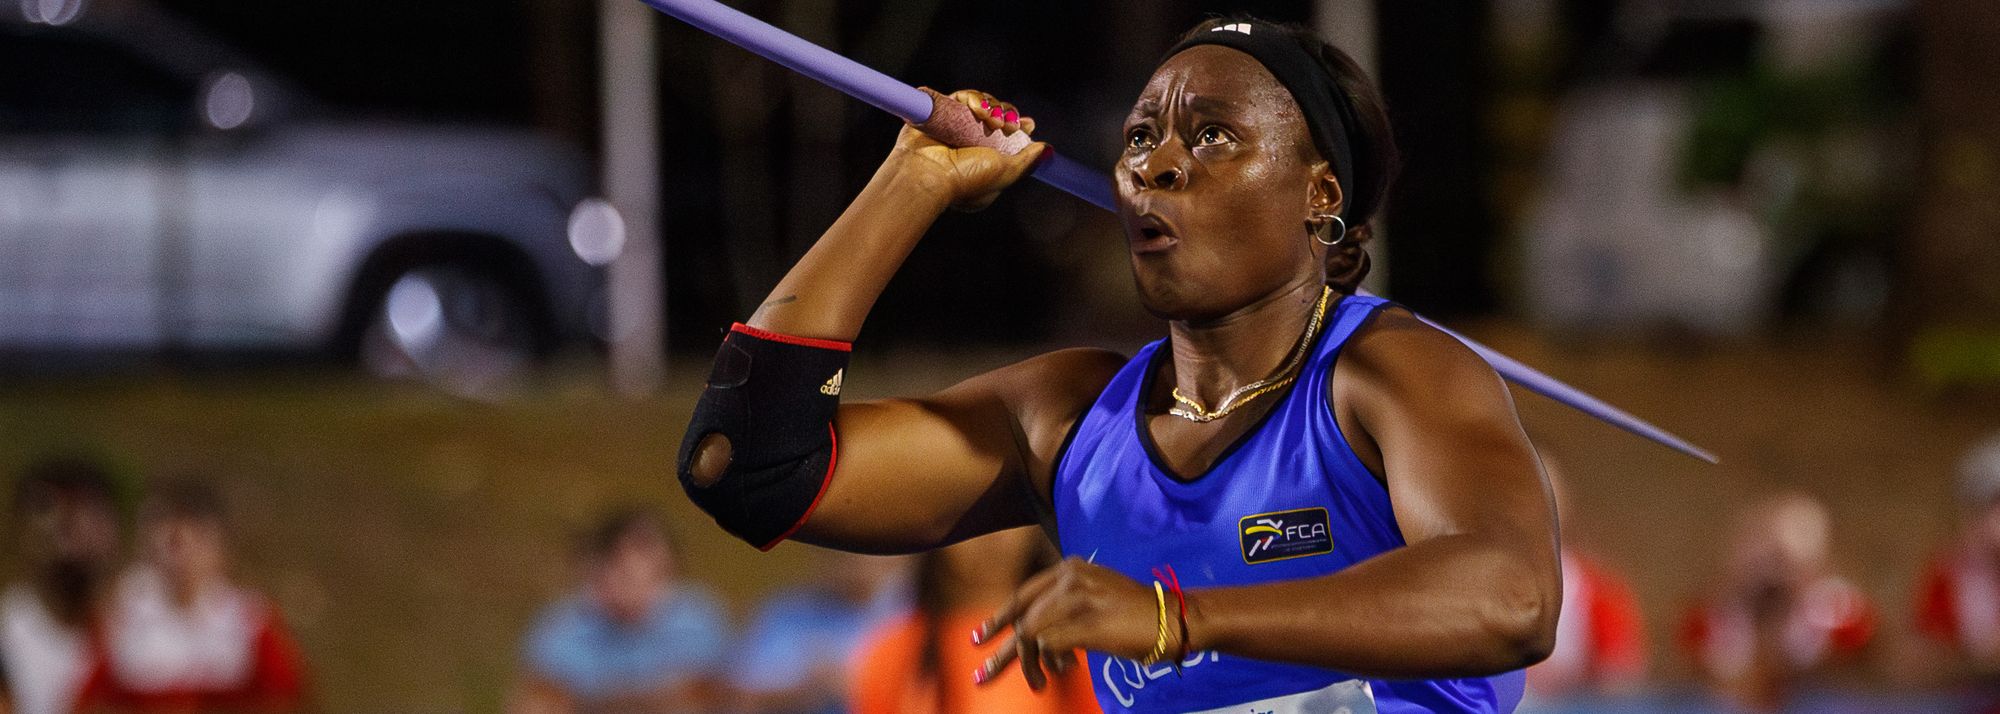 Colombia’s Flor Denis Ruiz broke her own South American javelin record with a world-leading 66.70m